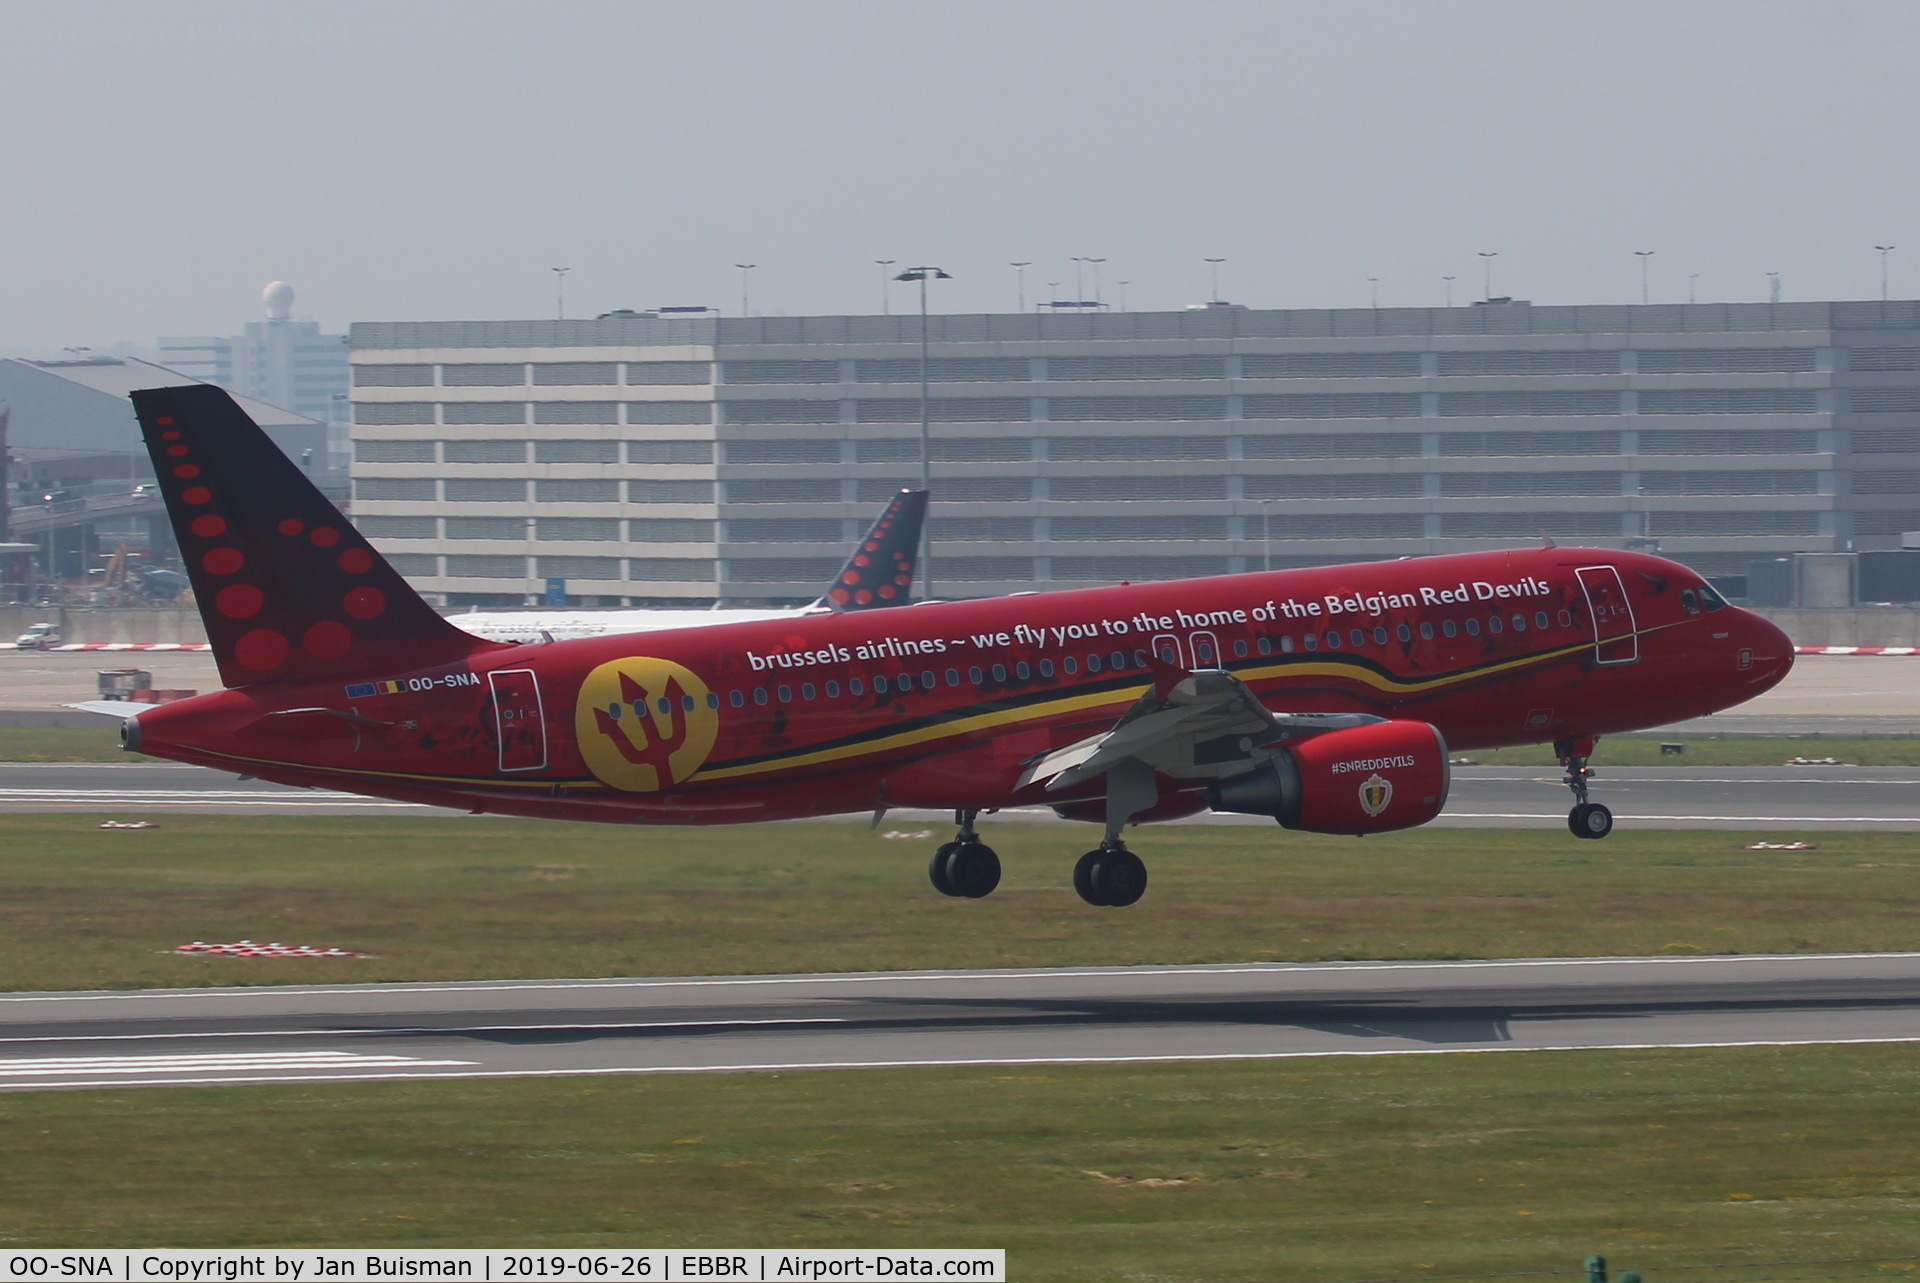 OO-SNA, 2001 Airbus A320-214 C/N 1441, Brussels Airlines -Red Devils livery